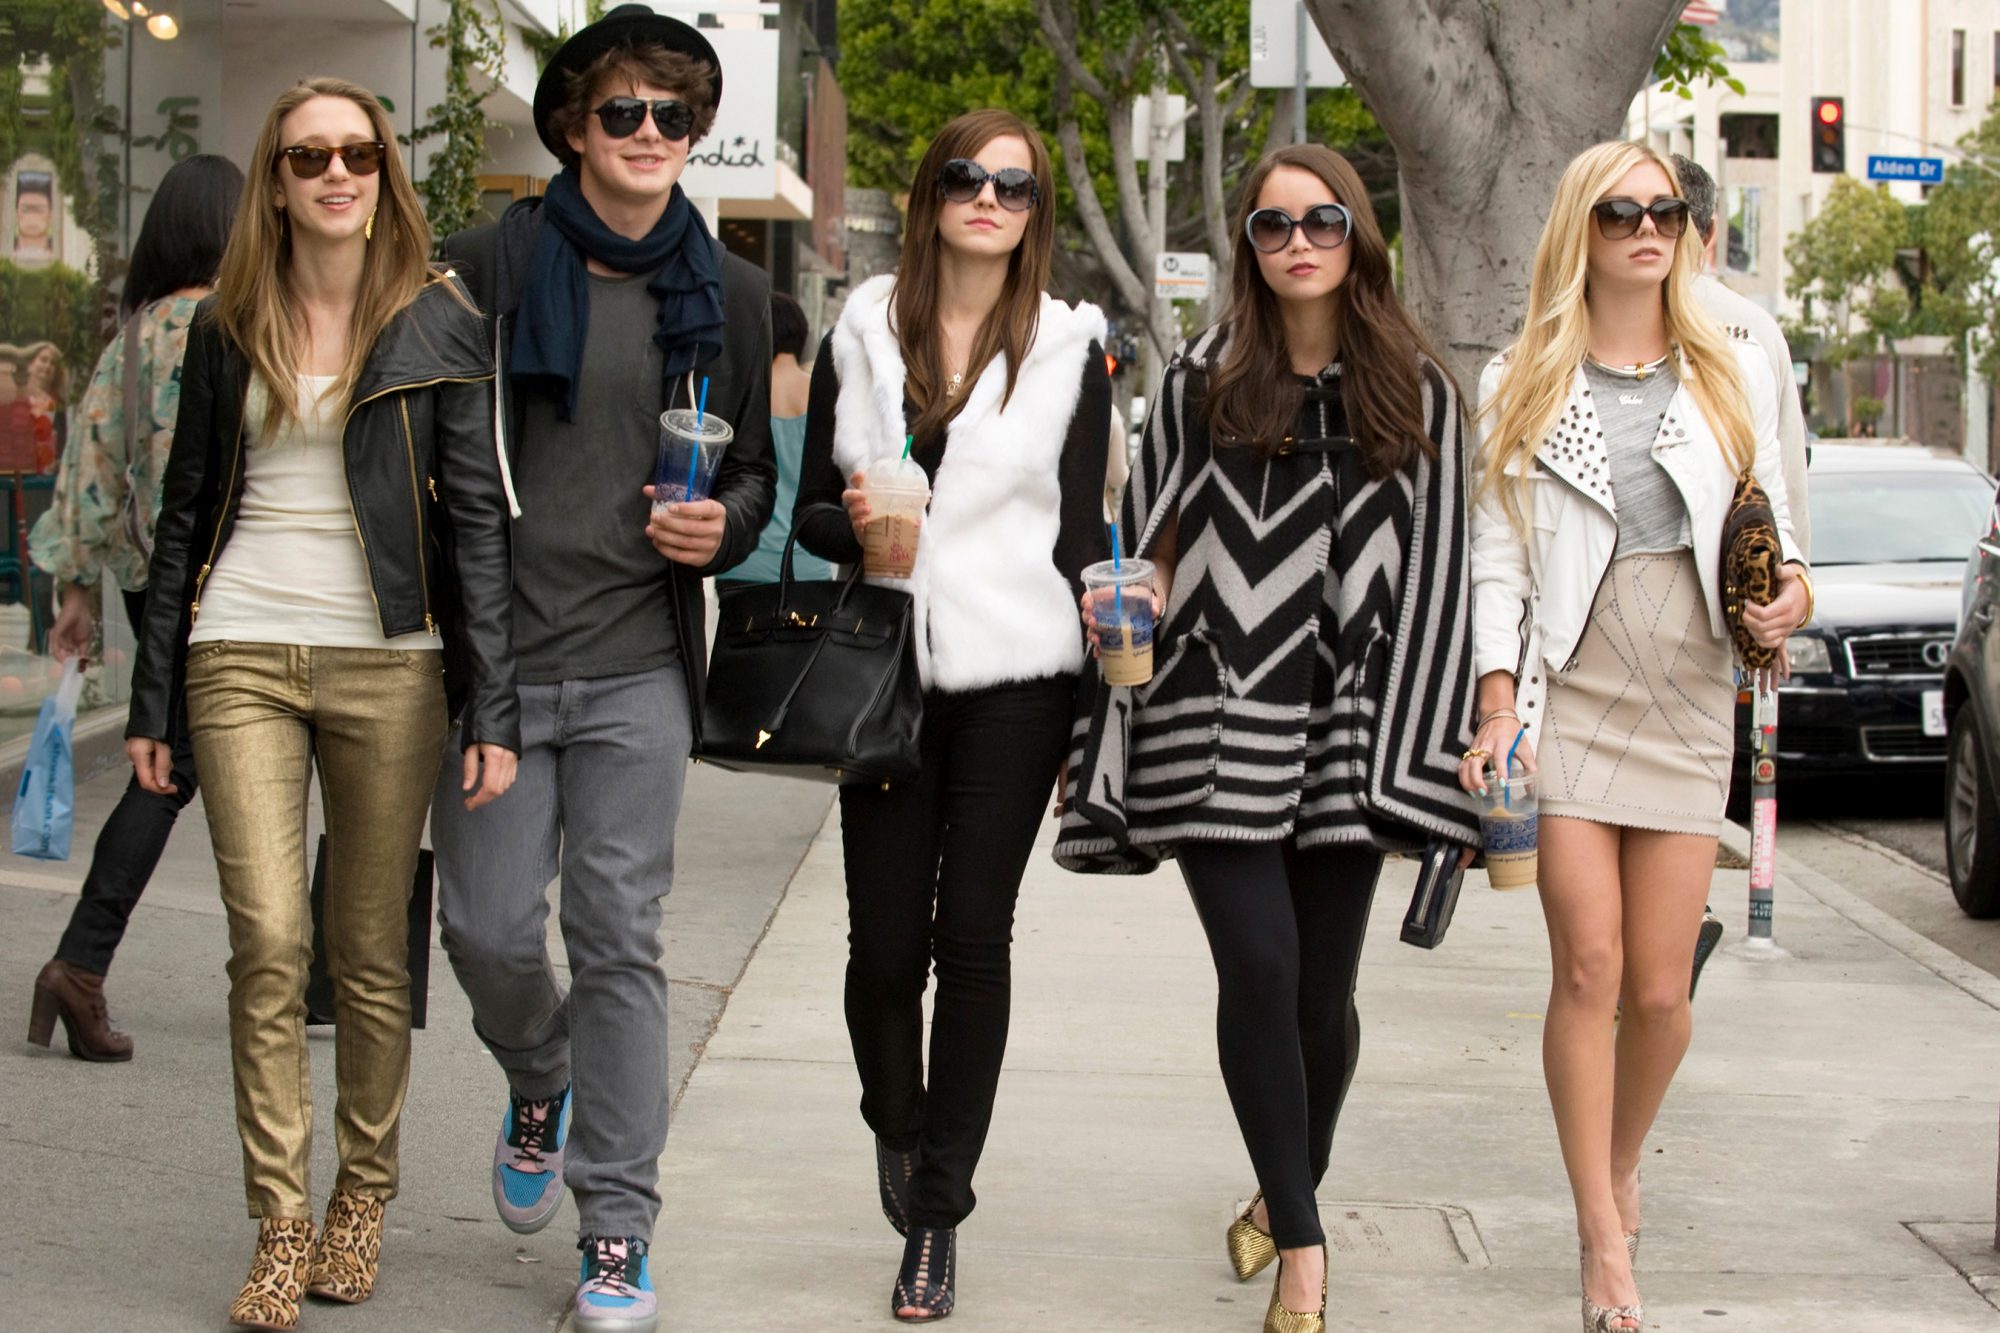 Taissa Farmiga, Israel Broussard, Emma Watson, Katie Chang, and Claire Julien in 'The Bling Ring'